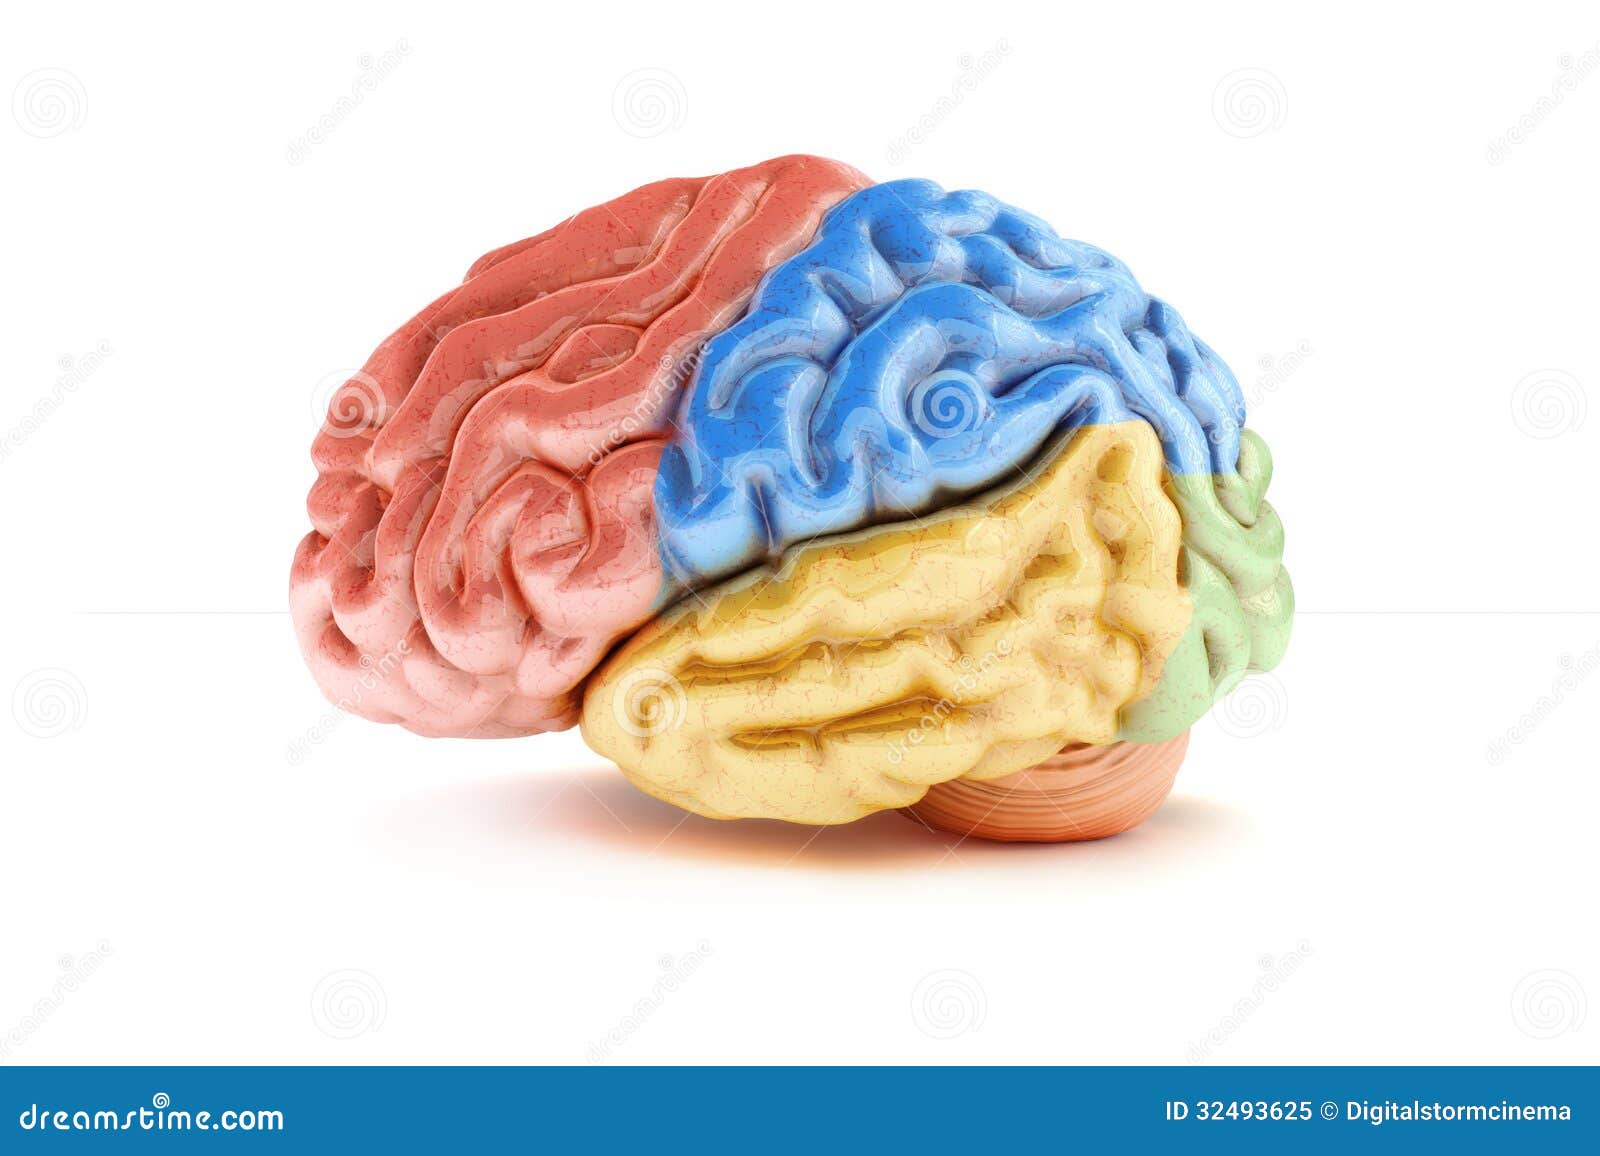 colored sections of a human brain